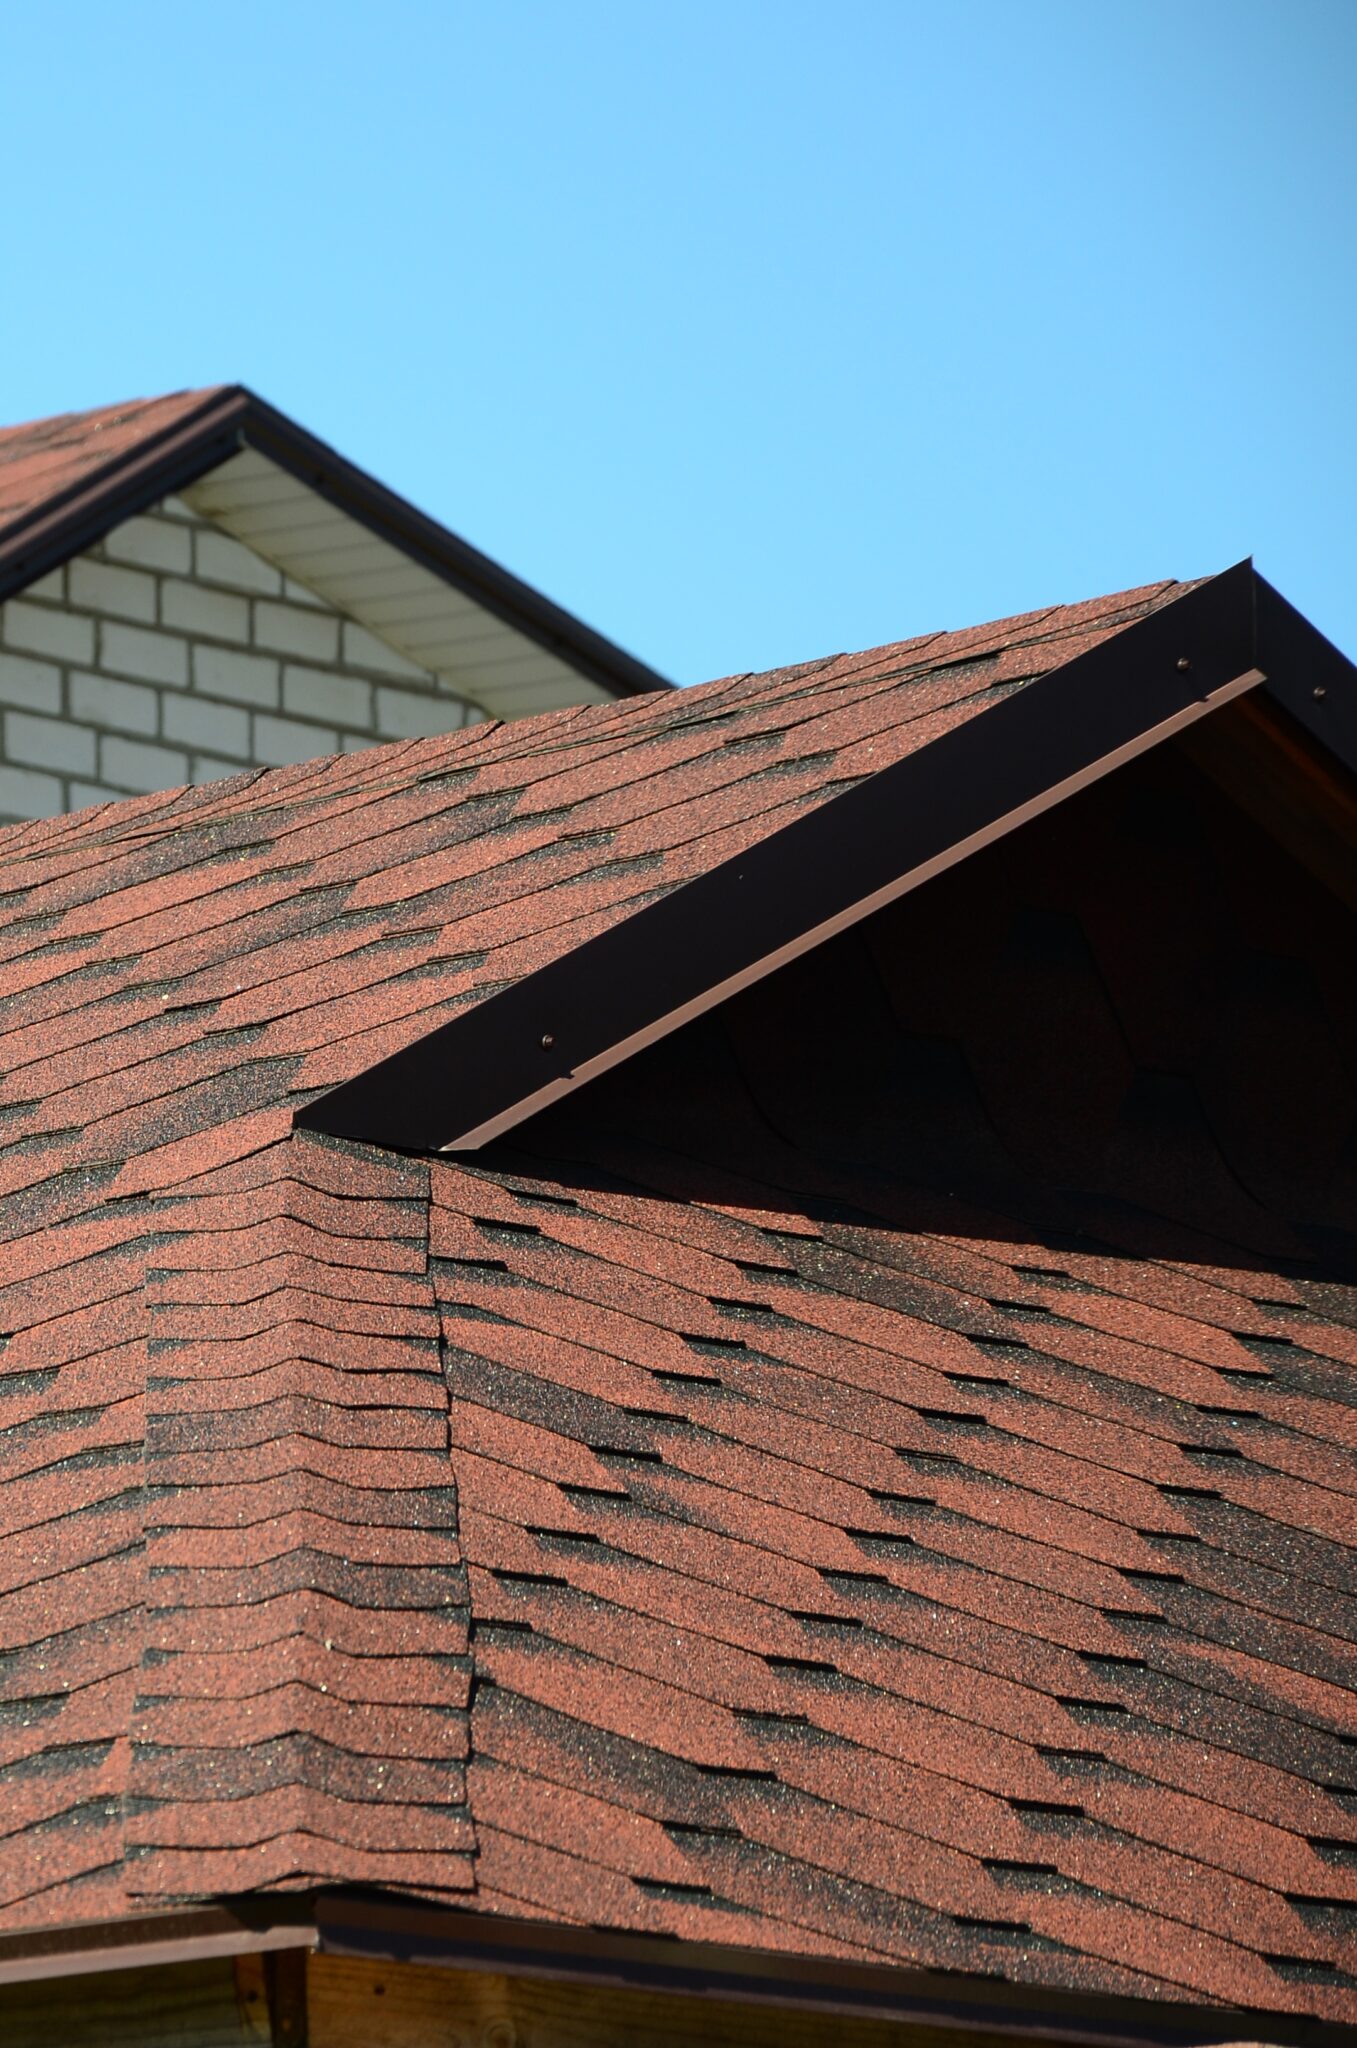 The roof is covered with bituminous shingles of brown color.